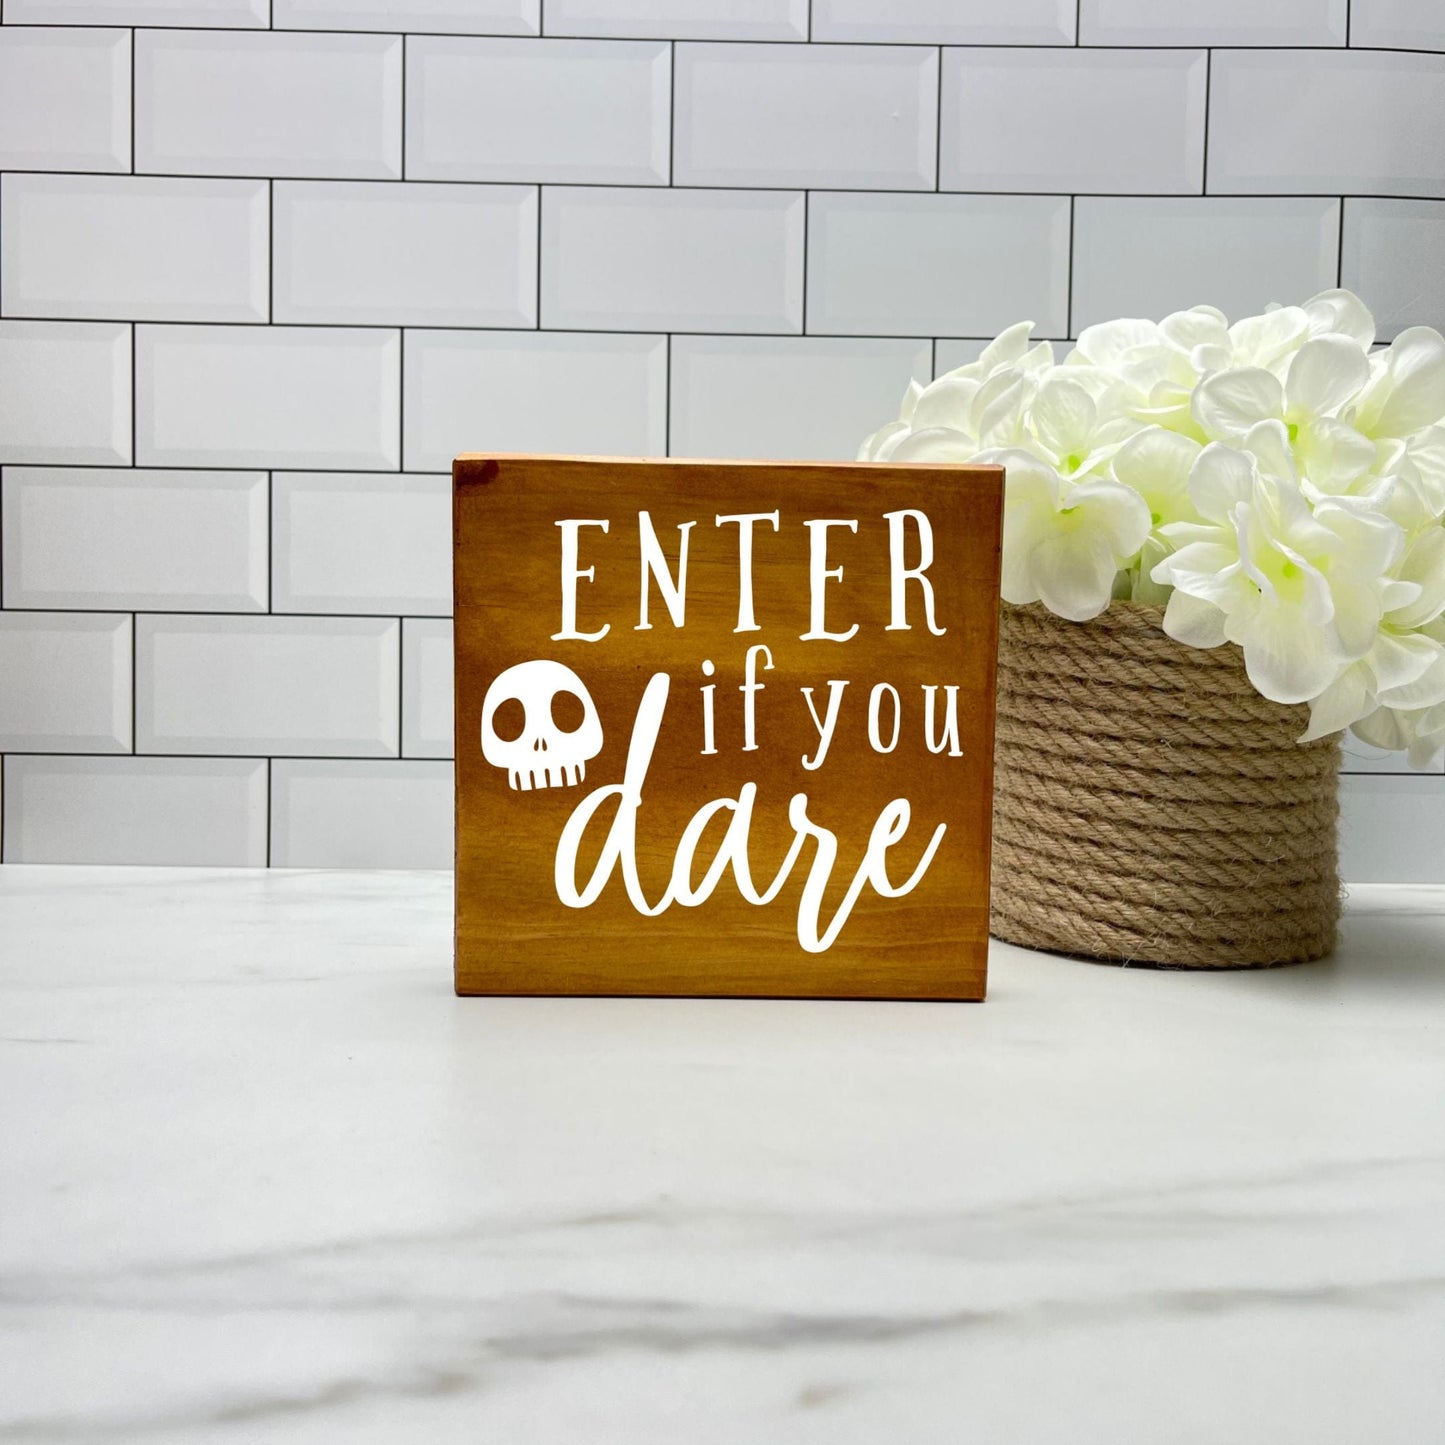 Enter if you dare Wood Sign, Halloween Wood Sign, Halloween Home Decor, Spooky Decor